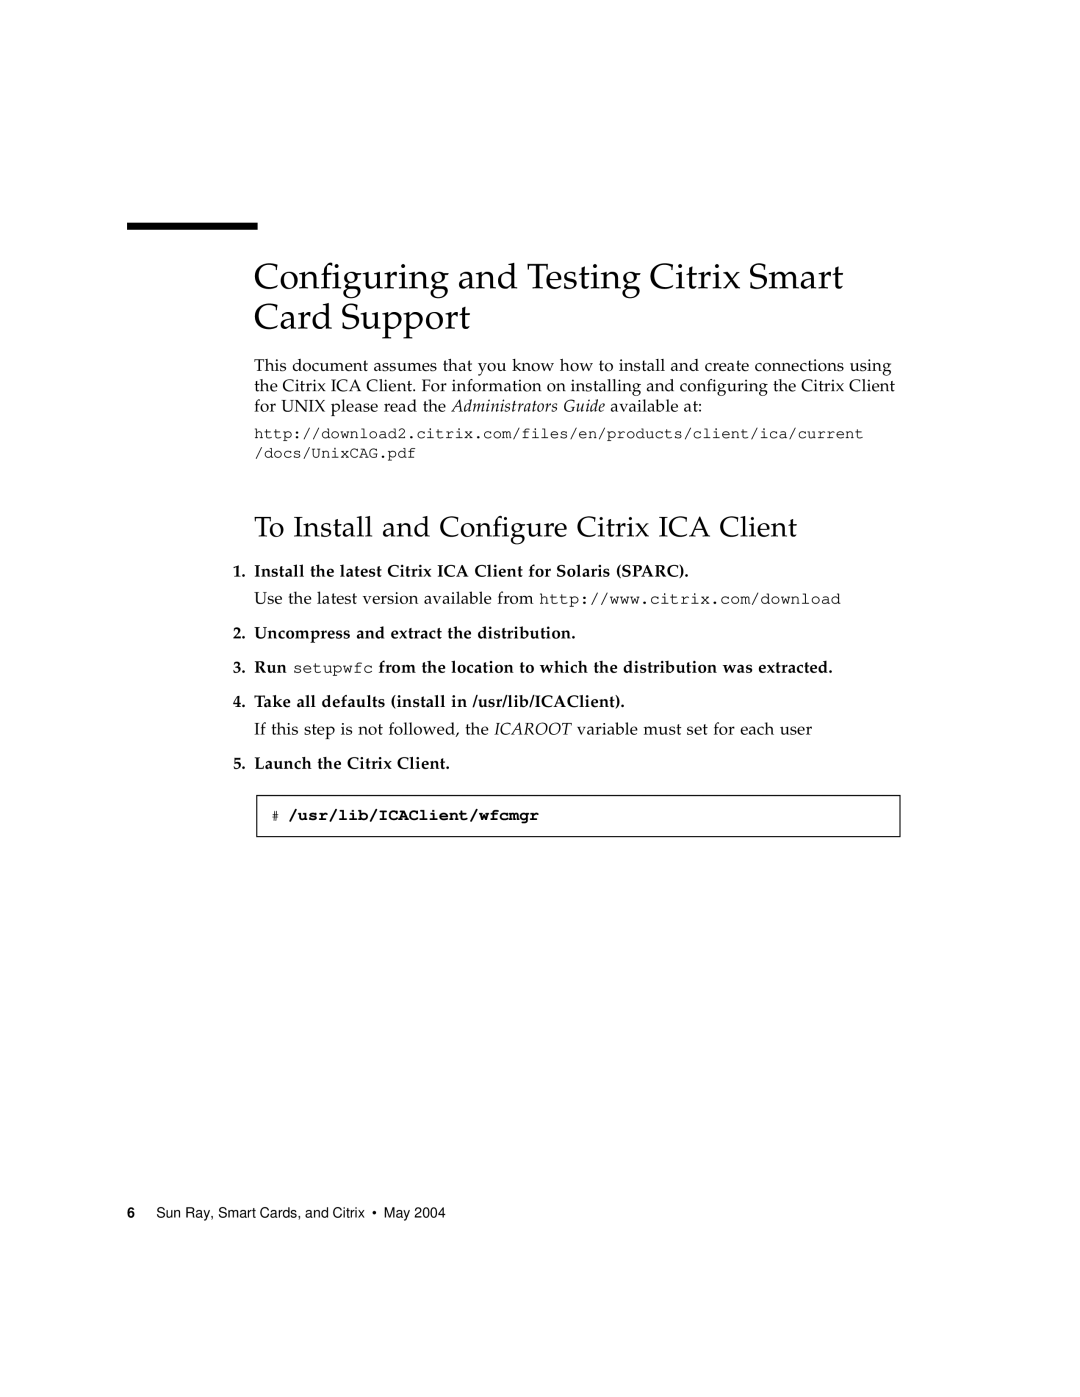 Sun Microsystems and Citrix Configuring and Testing Citrix Smart Card Support, To Install and Configure Citrix ICA Client 